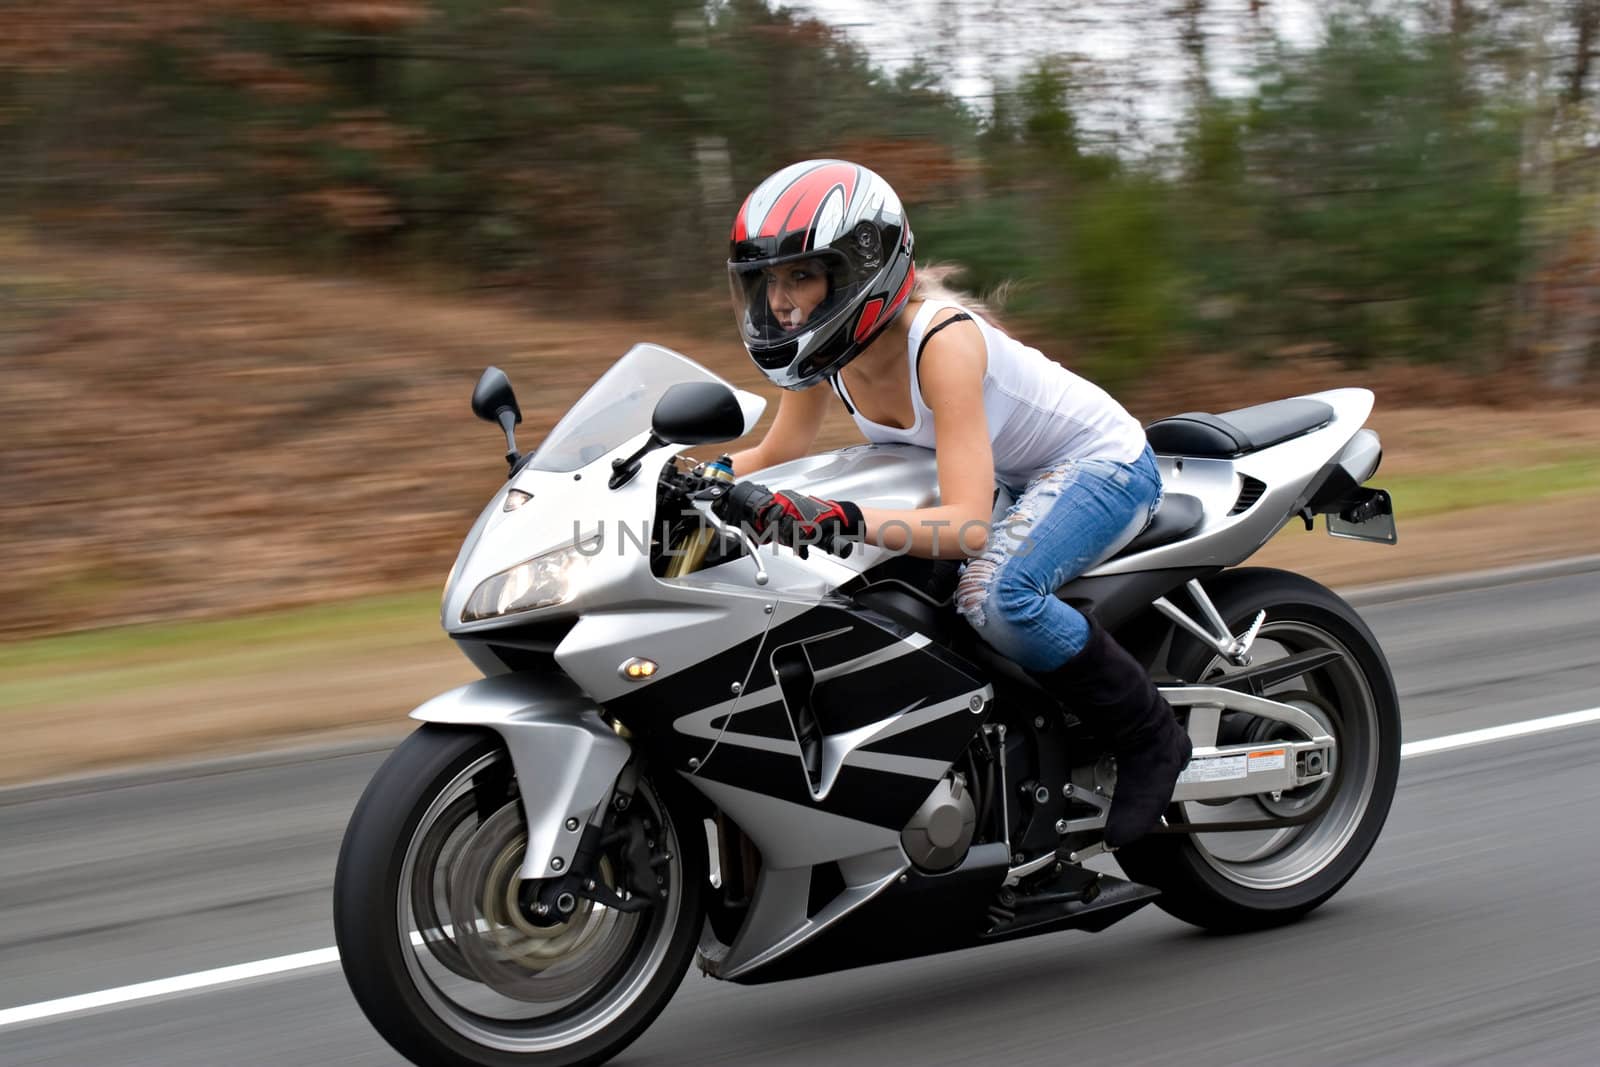 A woman drives a motorcycle at highway speeds with motion blur visible in the background.